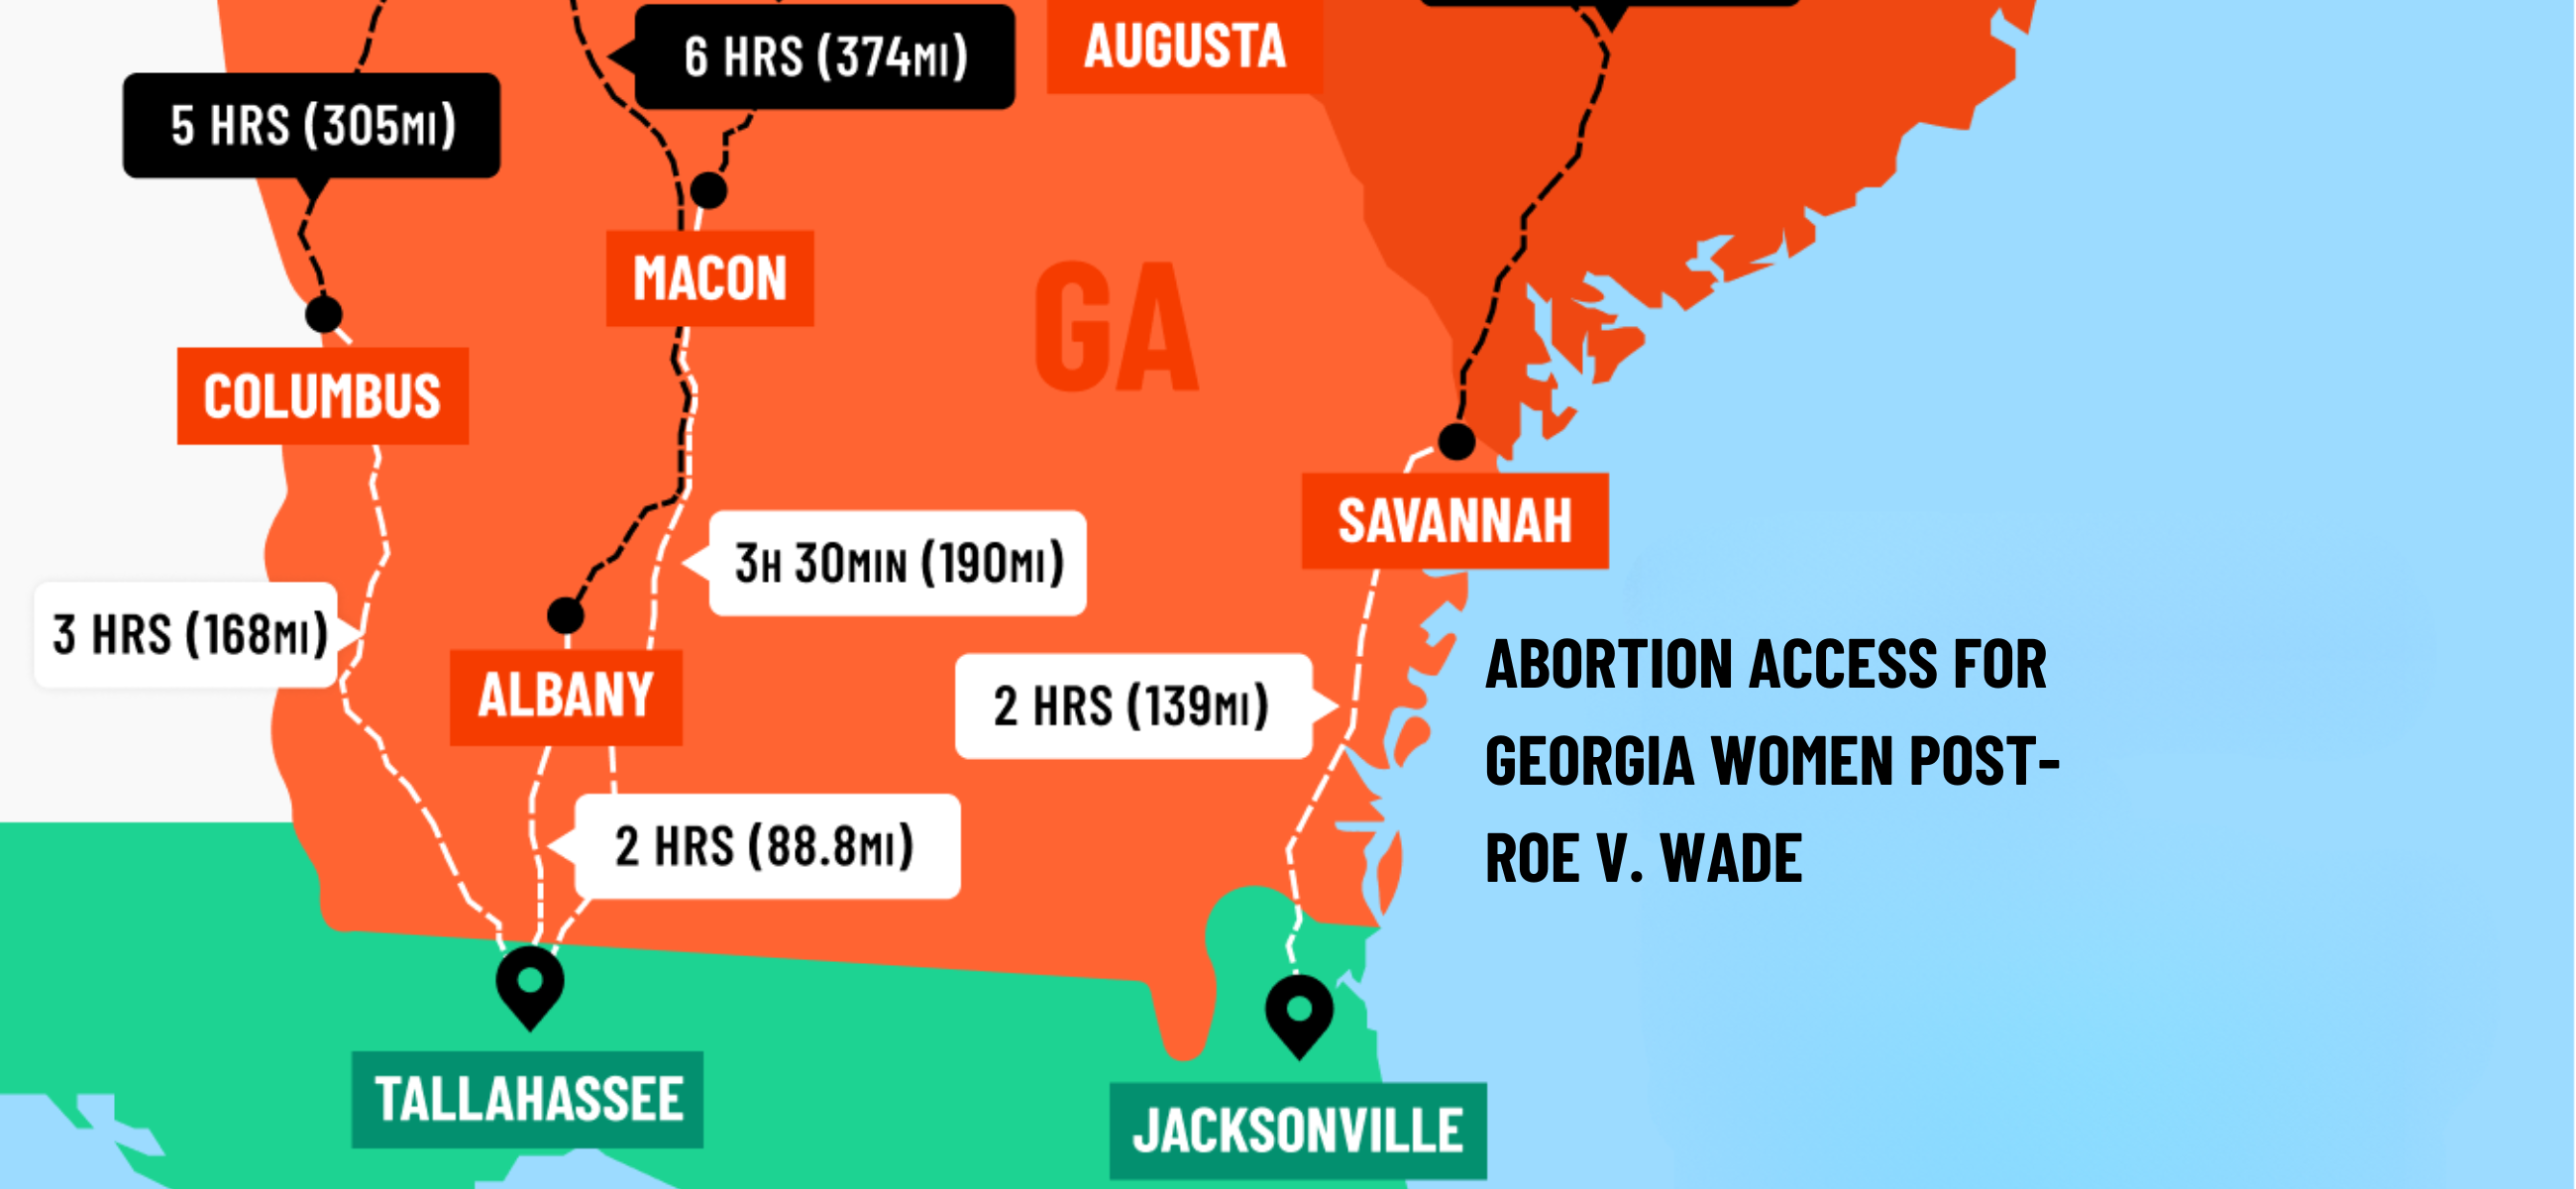 Georgia banned abortions after six weeks, in most cases, almost immediately after the U.S. Supreme Court overturned Roe v. Wade. For Georgia women, that meant traveling hours out of state to obtain the procedure, with Florida and North Carolina being the closest states.